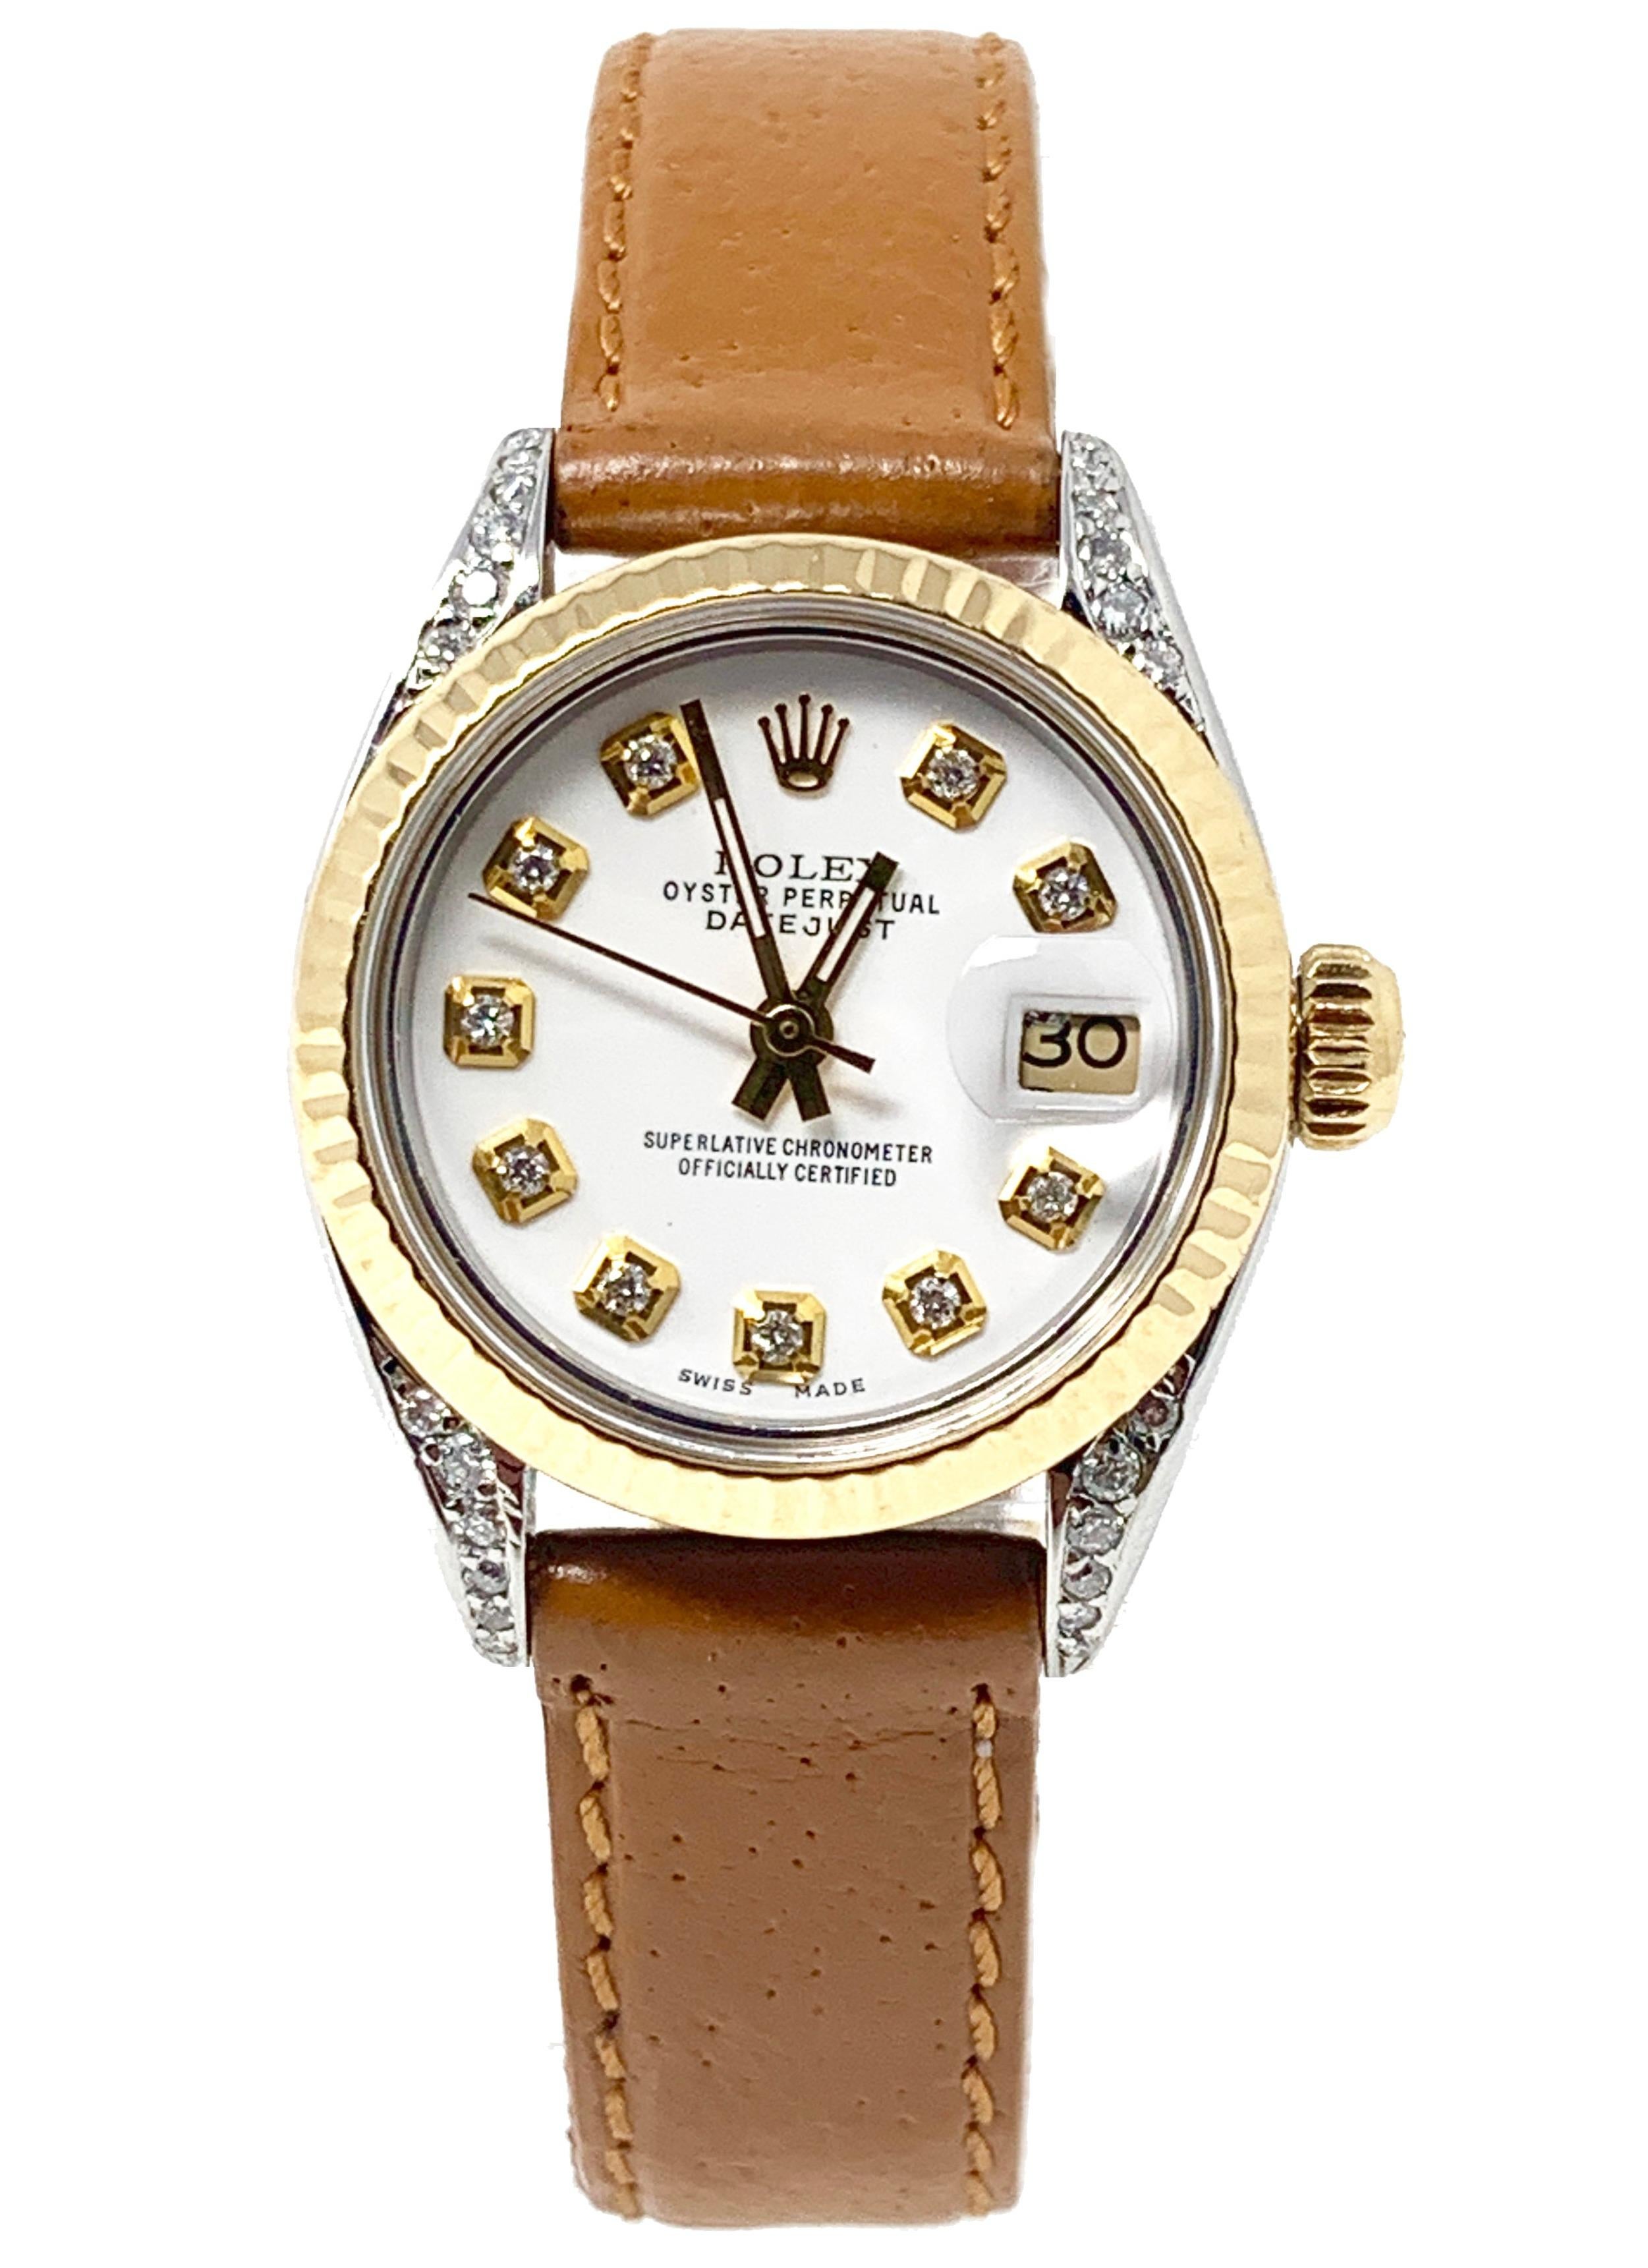 (Watch Description)
Brand - Rolex
Gender - Ladies
Model - 69173 Datejust 
Metals - Yellow gold/Stainless steel 
Case size - 26mm
Bezel - Yellow Gold fluted
Crystal - Sapphire
Movement - Automatic Cal.2135
Dial - Refinished white diamond 
Wrist band